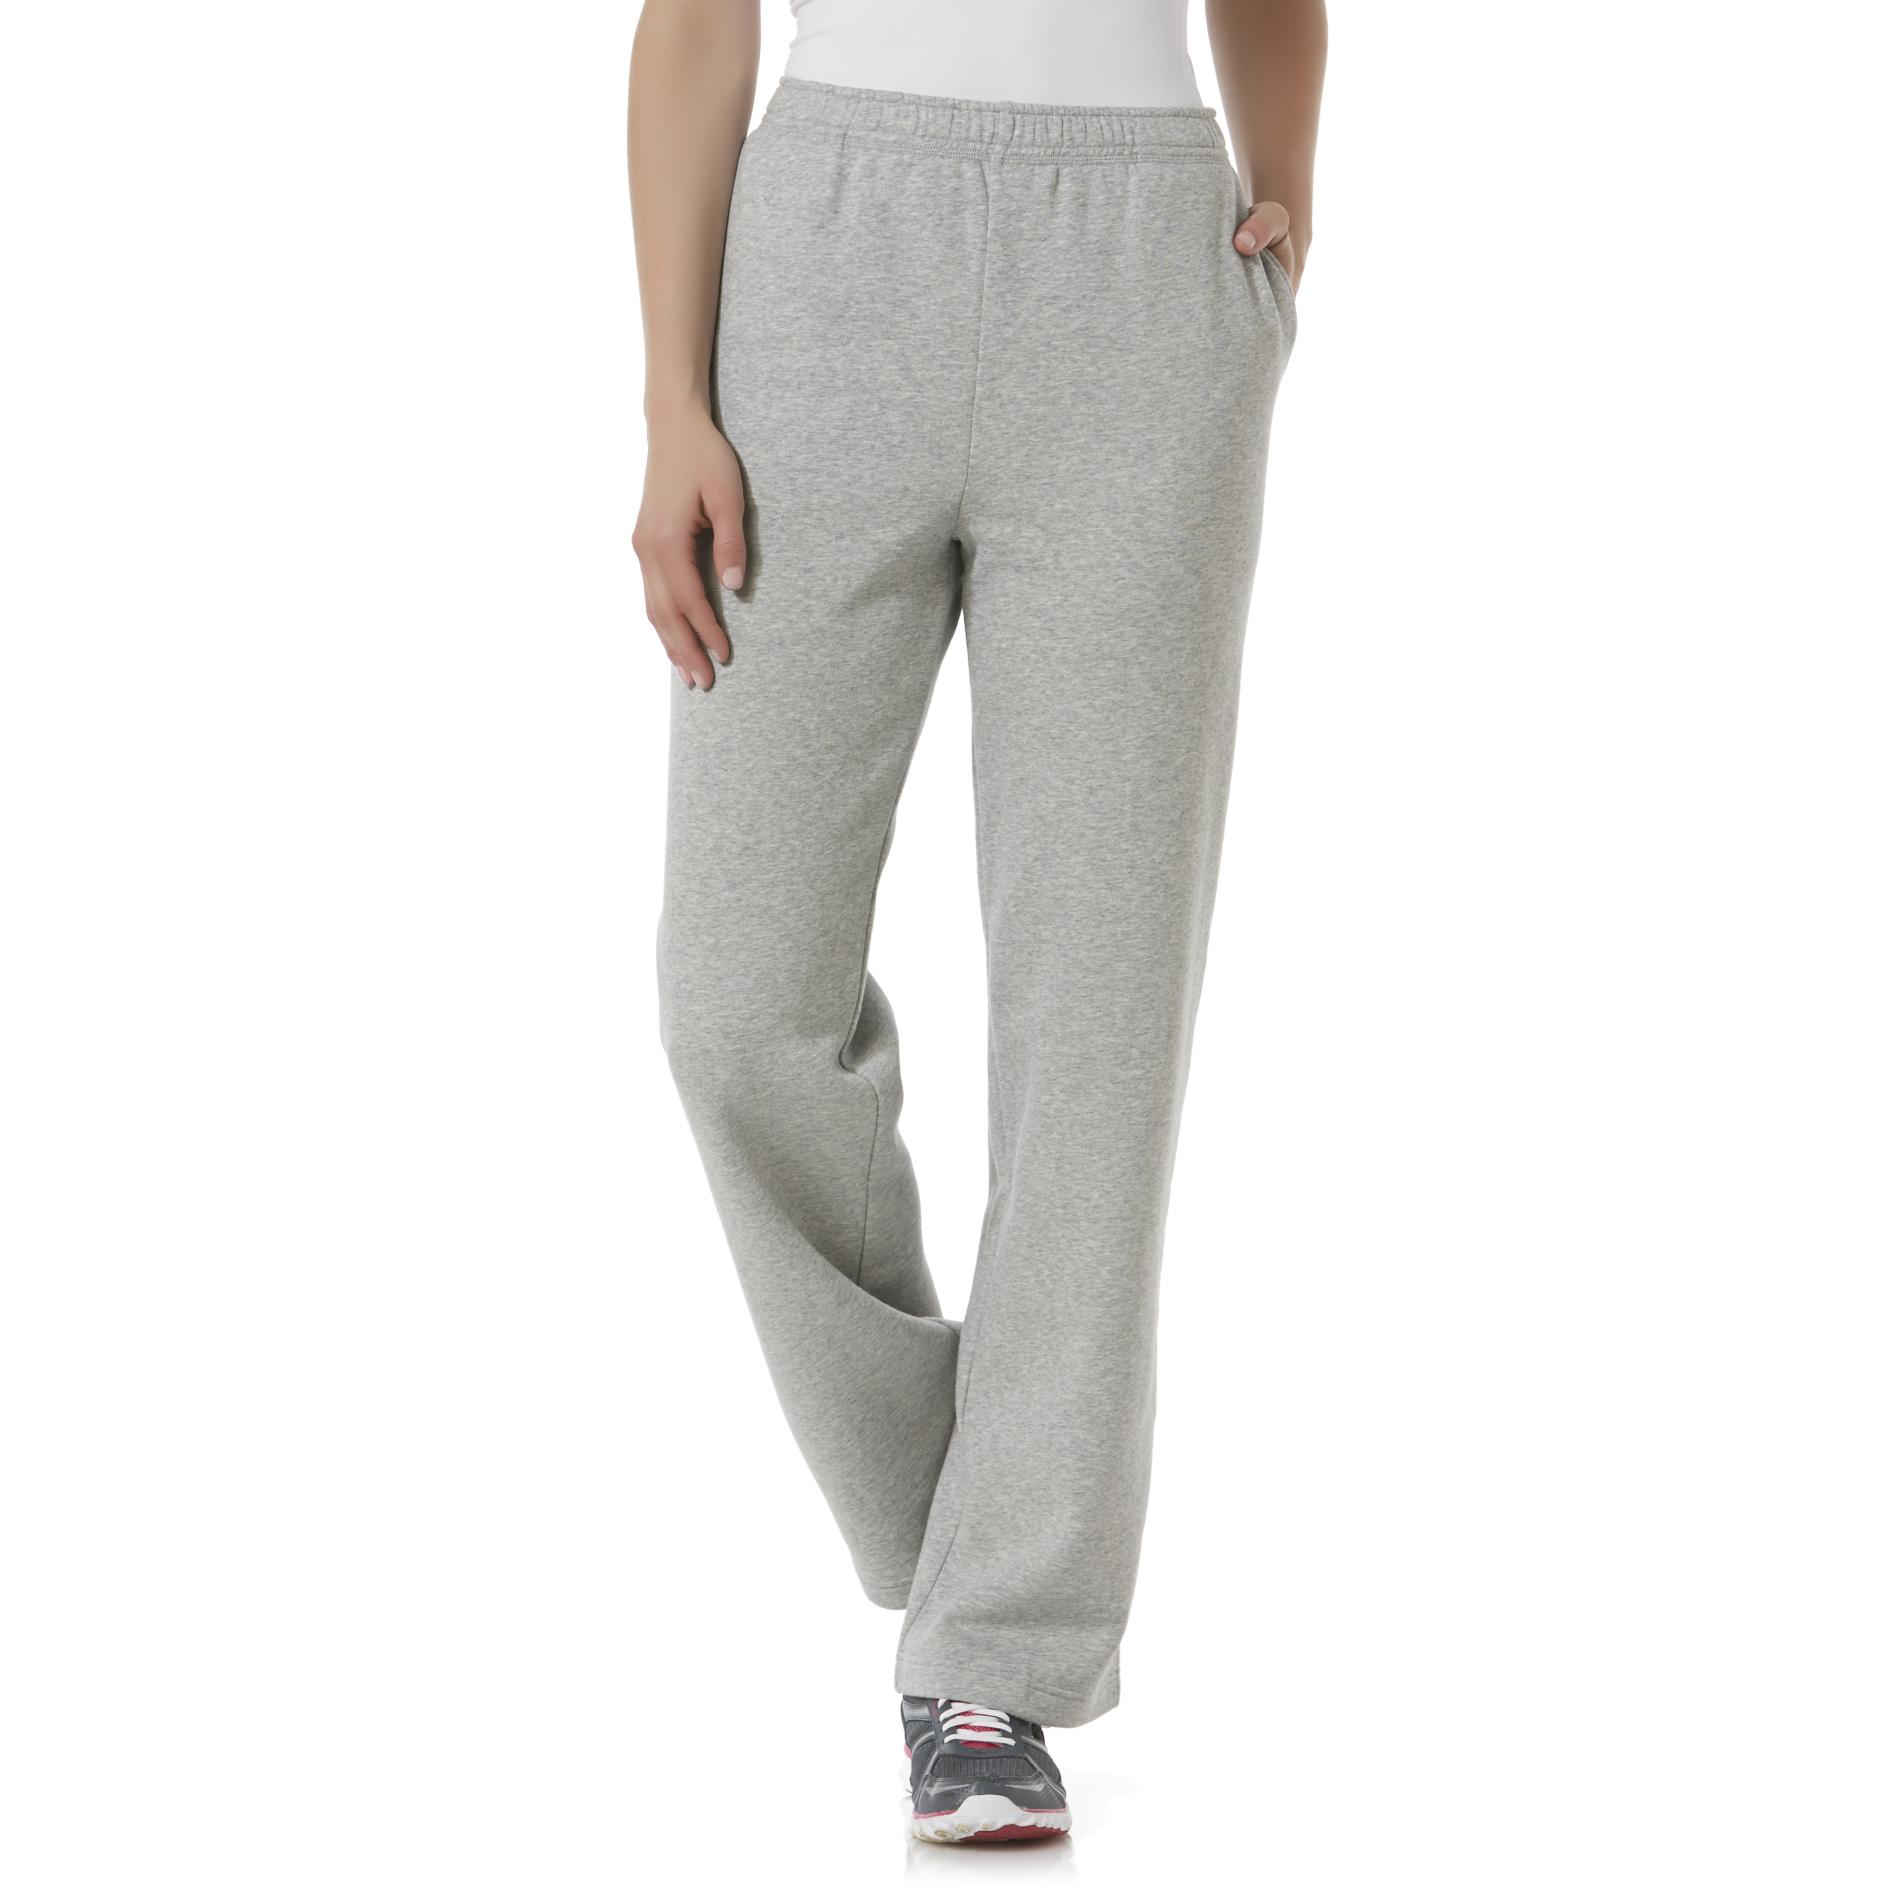 Tips on how to Style Girls Sweatpants – Telegraph